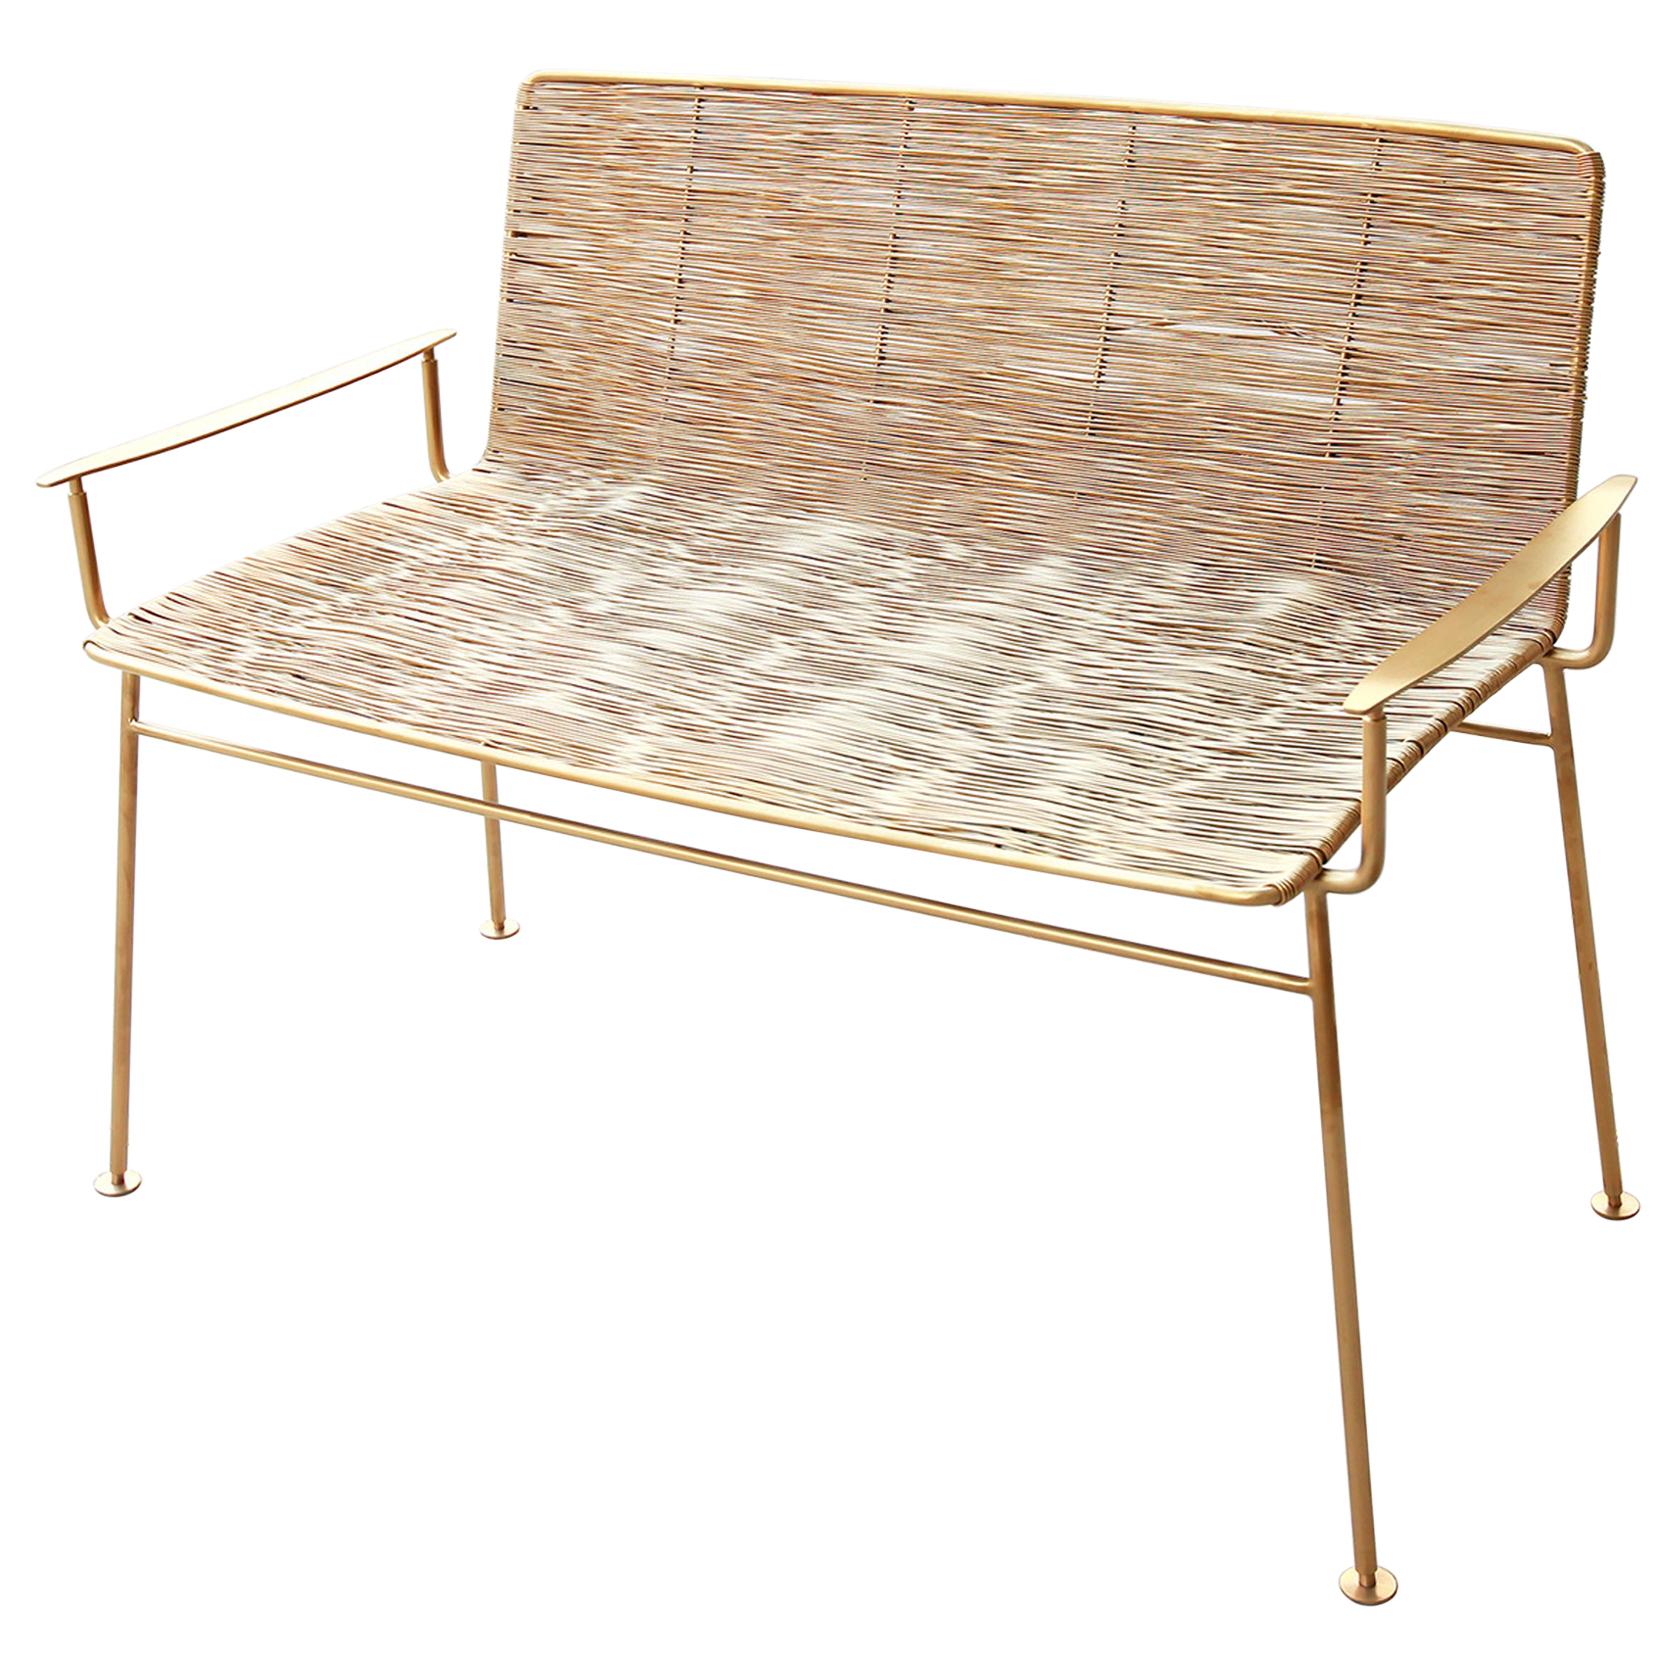 Gold Boy Garden Bench in Gold Titanium Finish, Handmade Edition by Ango For Sale